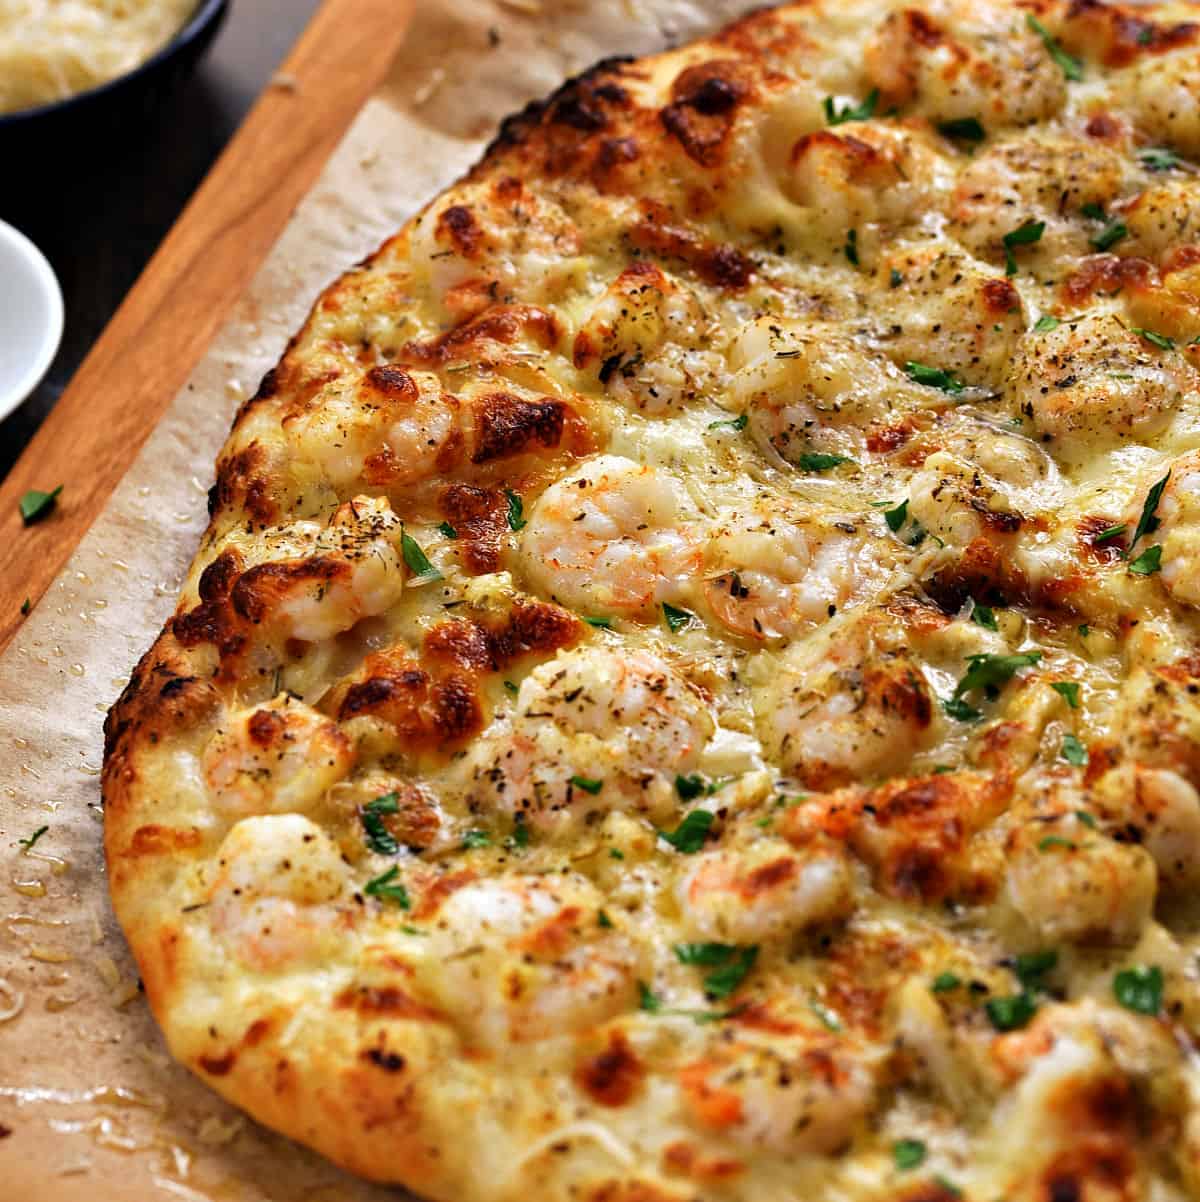 A whole shrimp scampi pizza topped with shrimp, melted cheese, and Italian parsley.